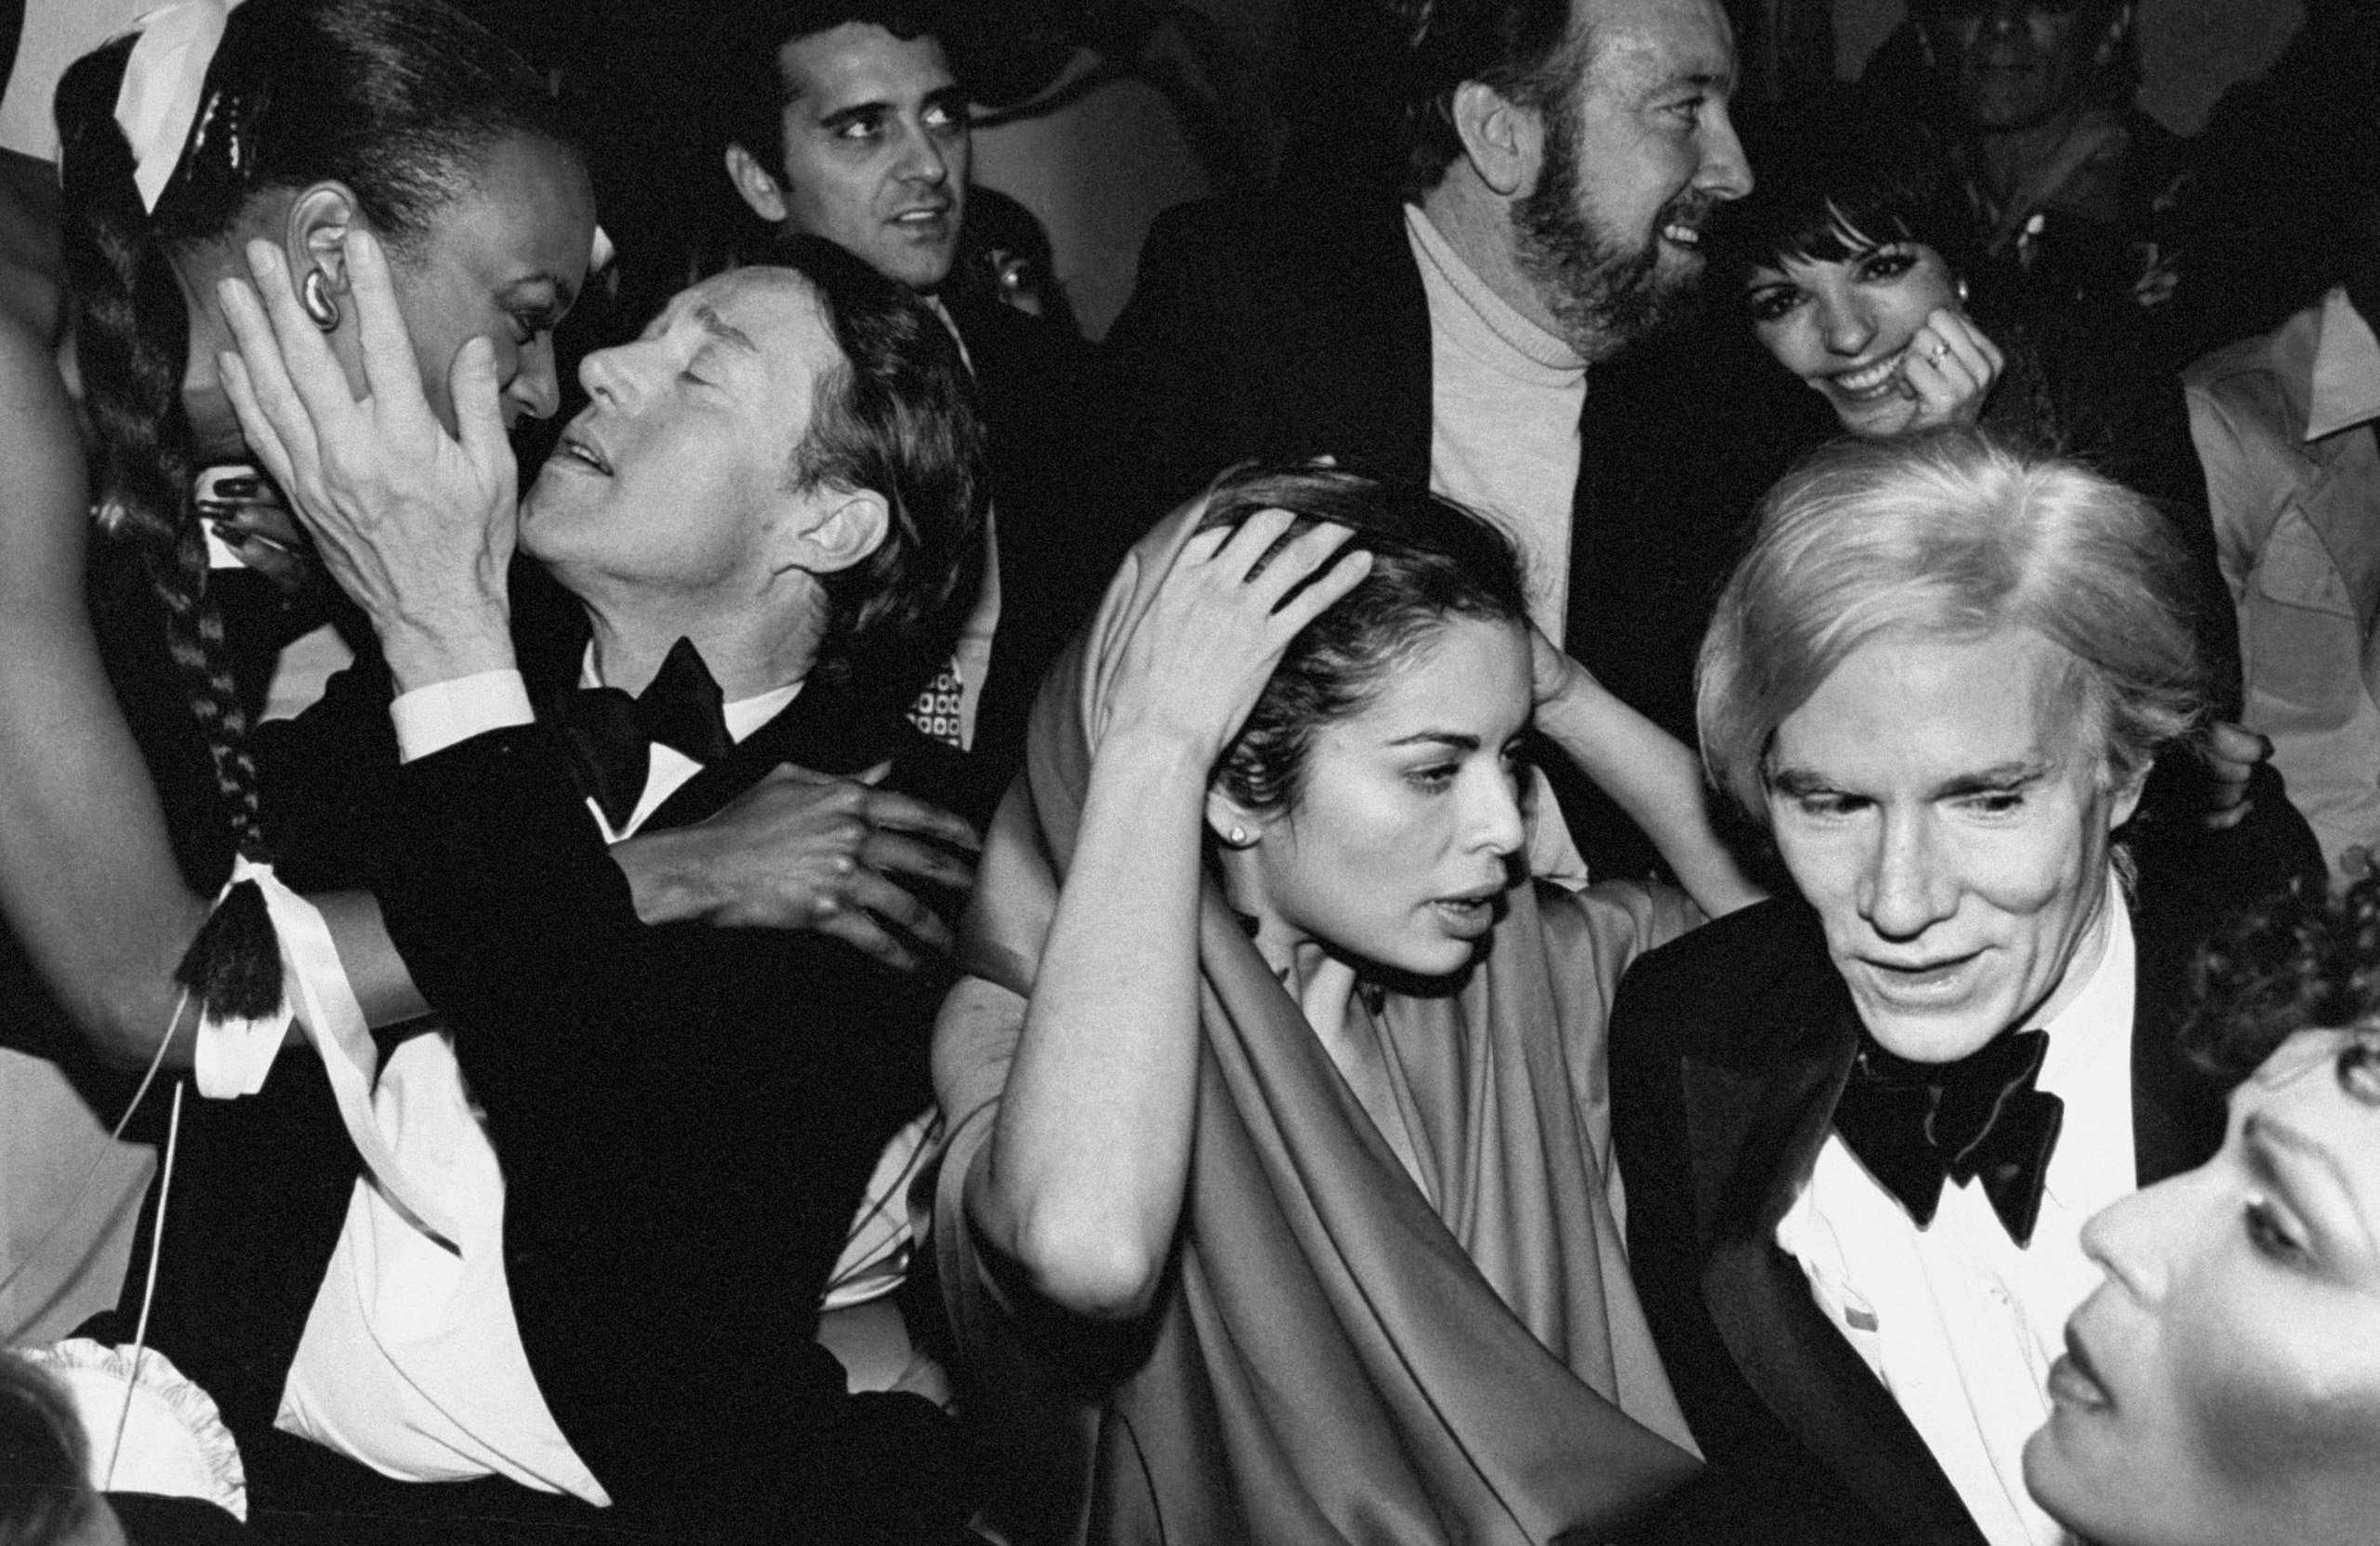 Celebrities during New Year's Eve party at Studio 54: Halston, Bianca Jagger, Jack Haley, Jr. and wife Liza Minnelli and Andy Warhol.  1978.